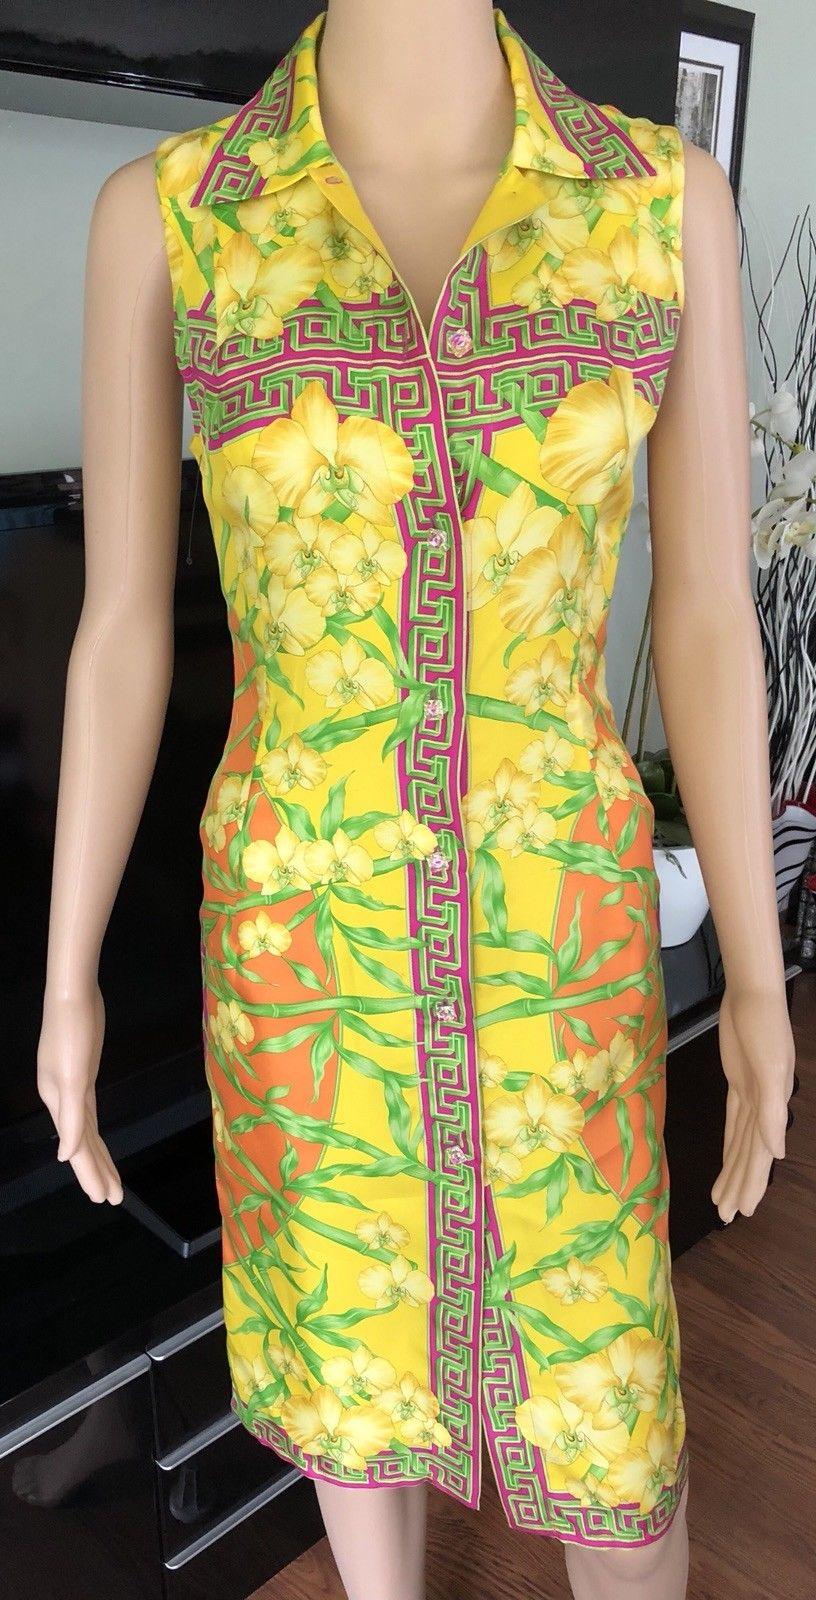 Gianni Versace S/S 2000 Vintage Bamboo Print Silk Dress Size IT 40

Gianni Versace silk dress with bamboo floral print throughout, pointed collar and button closures at front.


